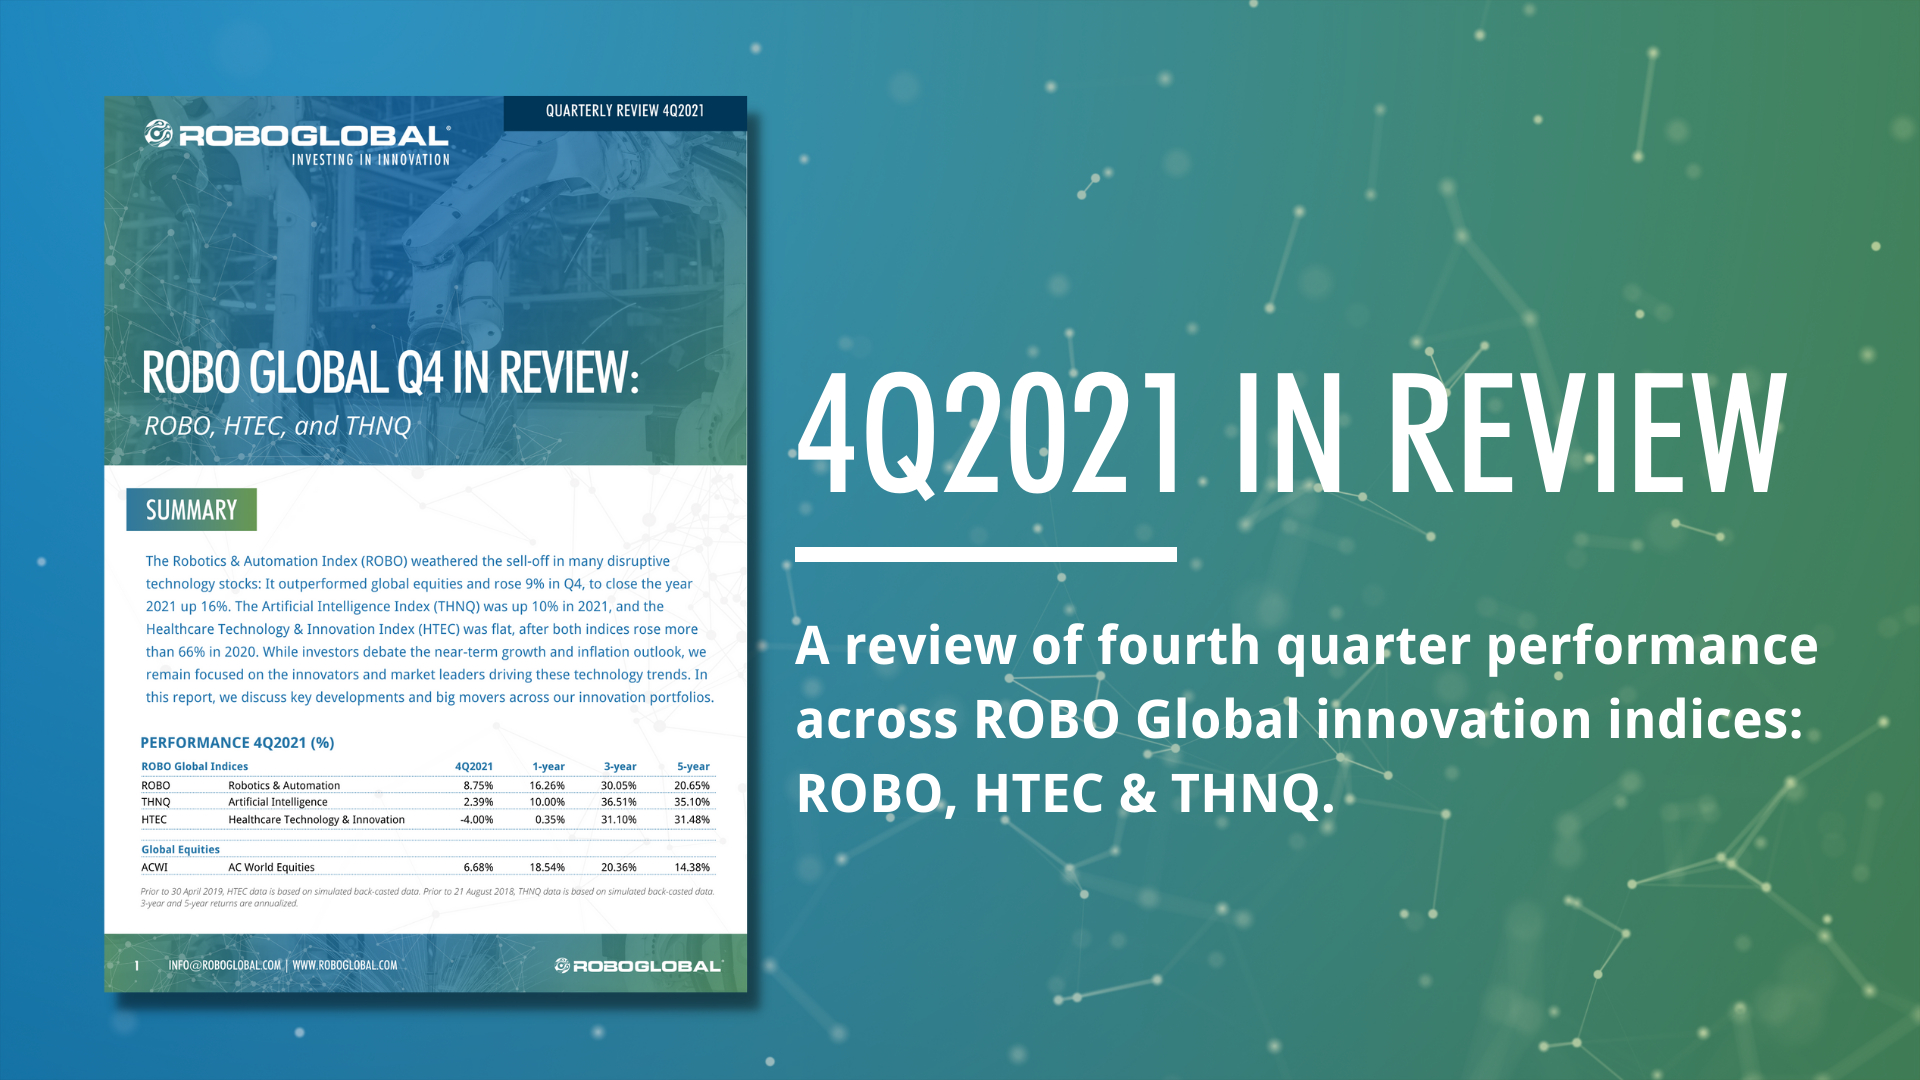 Q4 2021 In Review: ROBO Global Innovation Indices